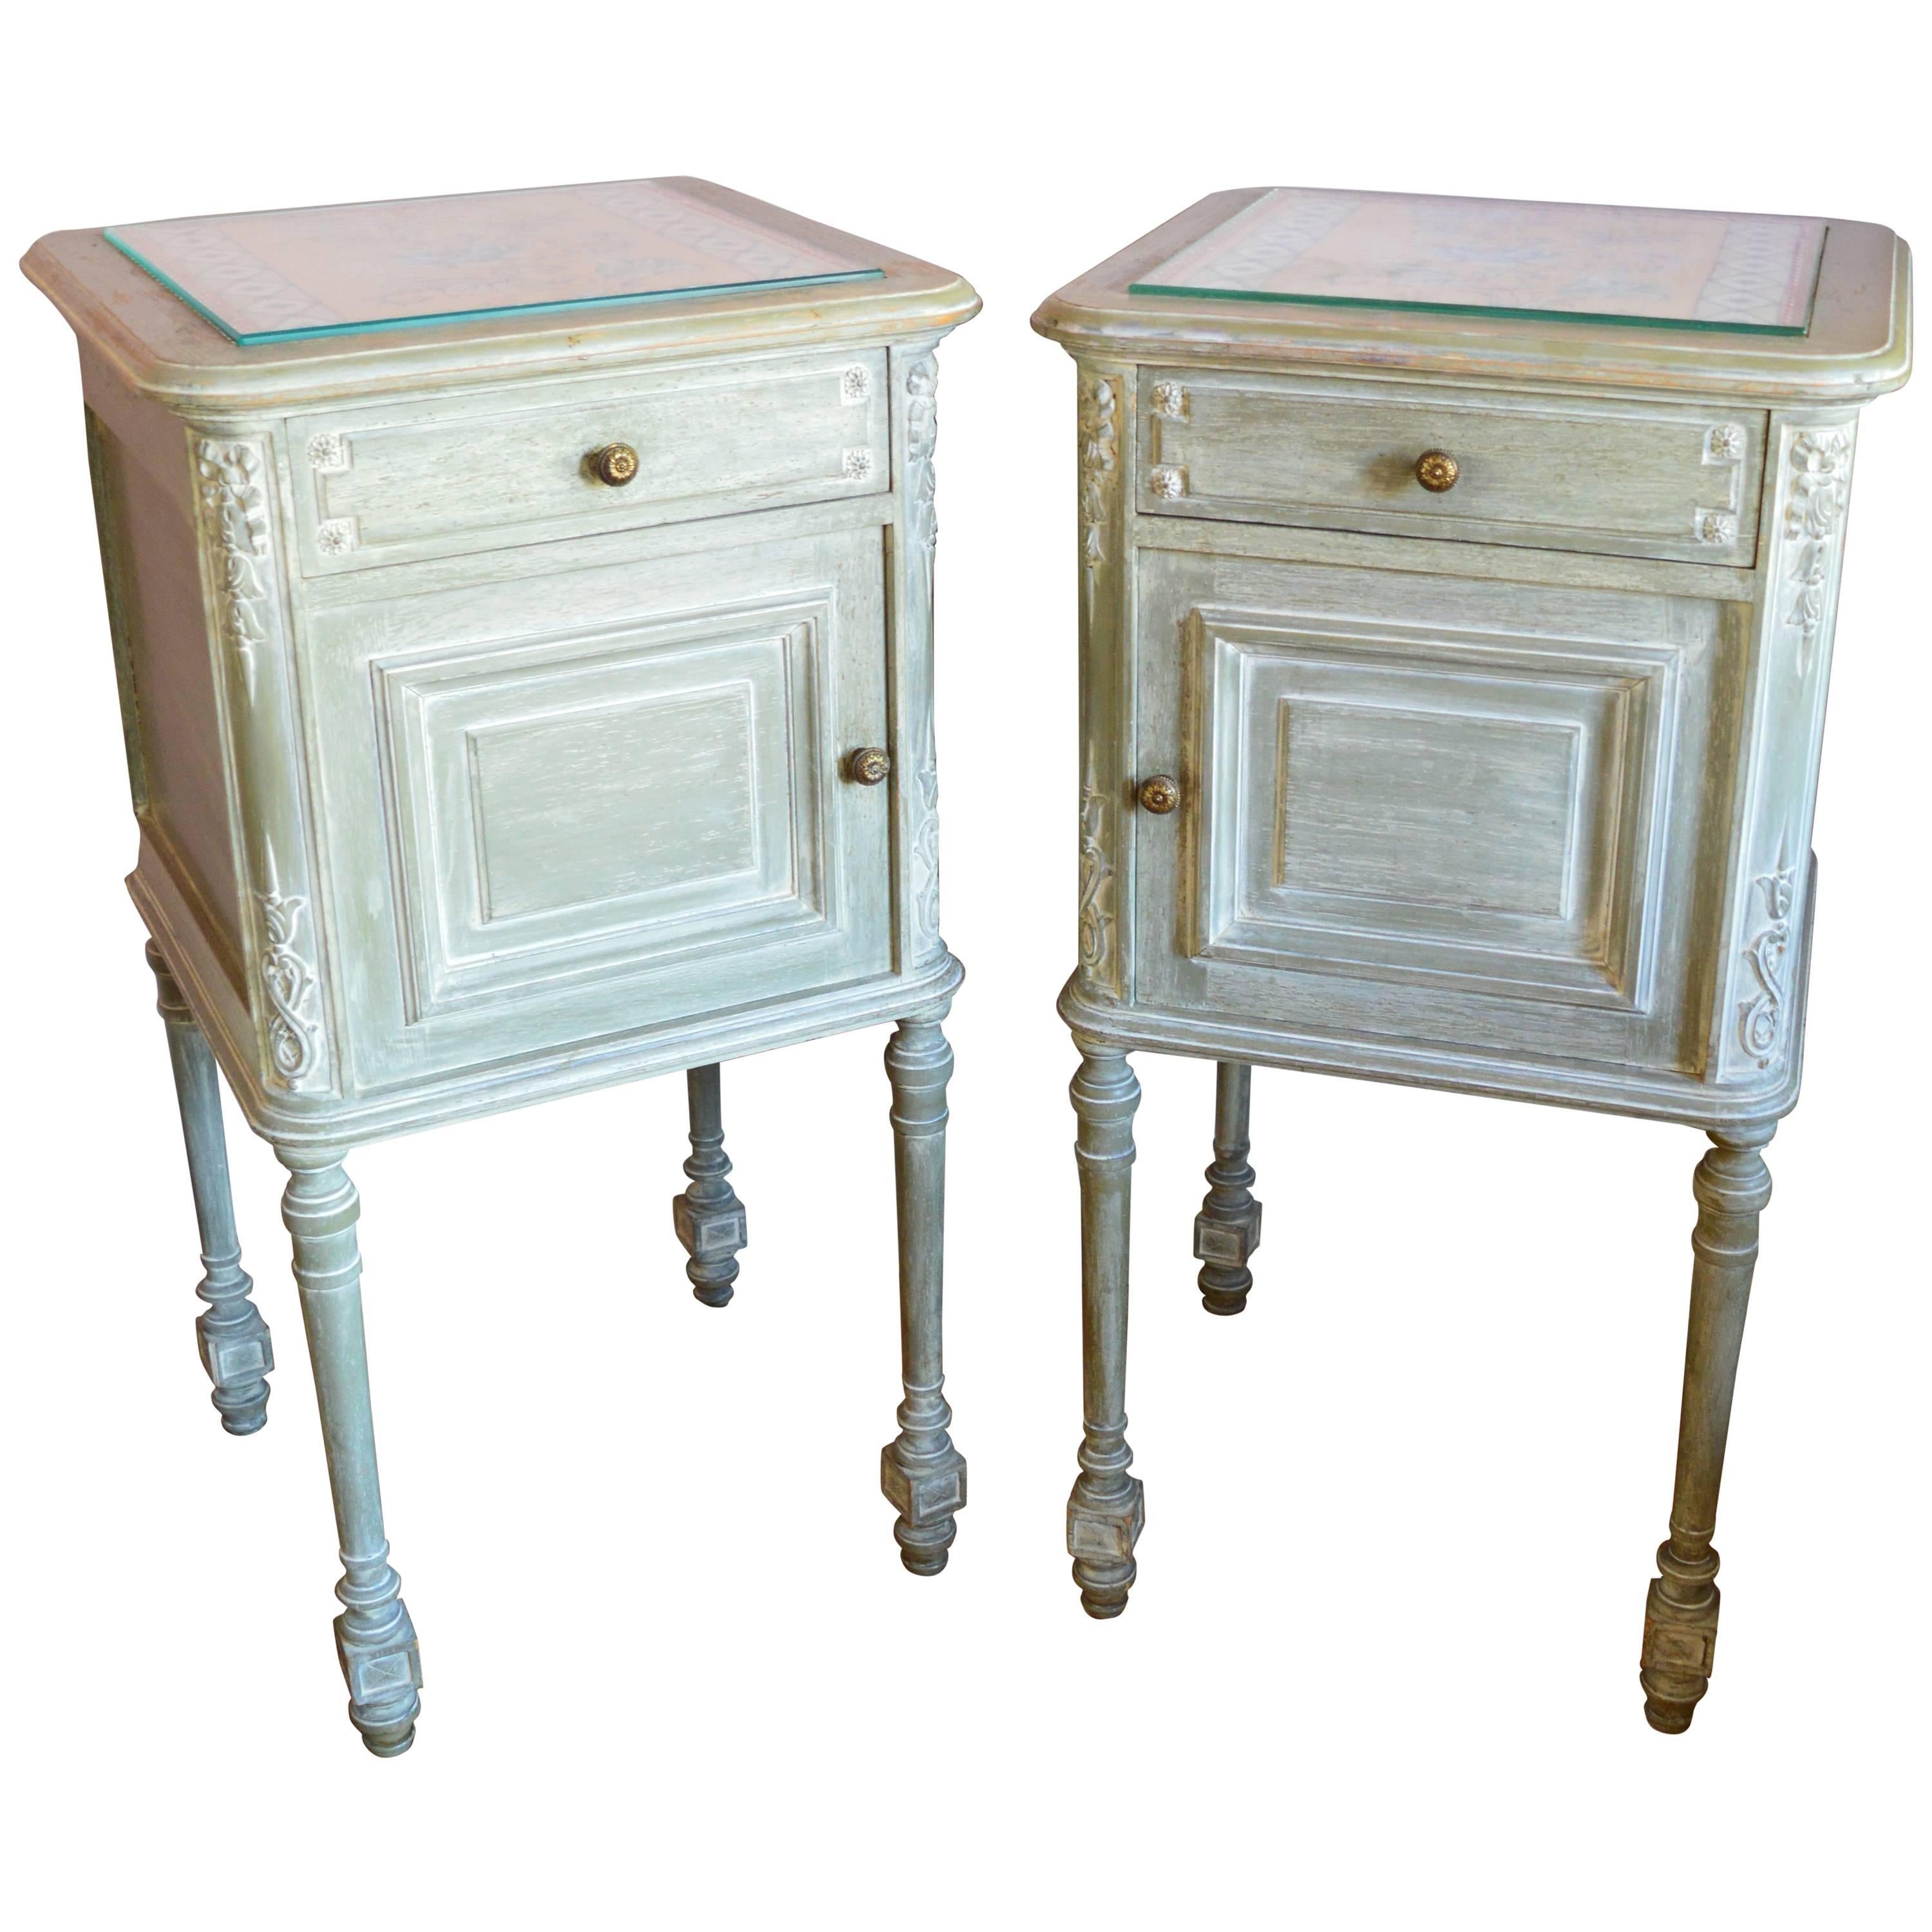 Pair of French Painted Louis XVI Style Bedside Cabinets, circa 1900